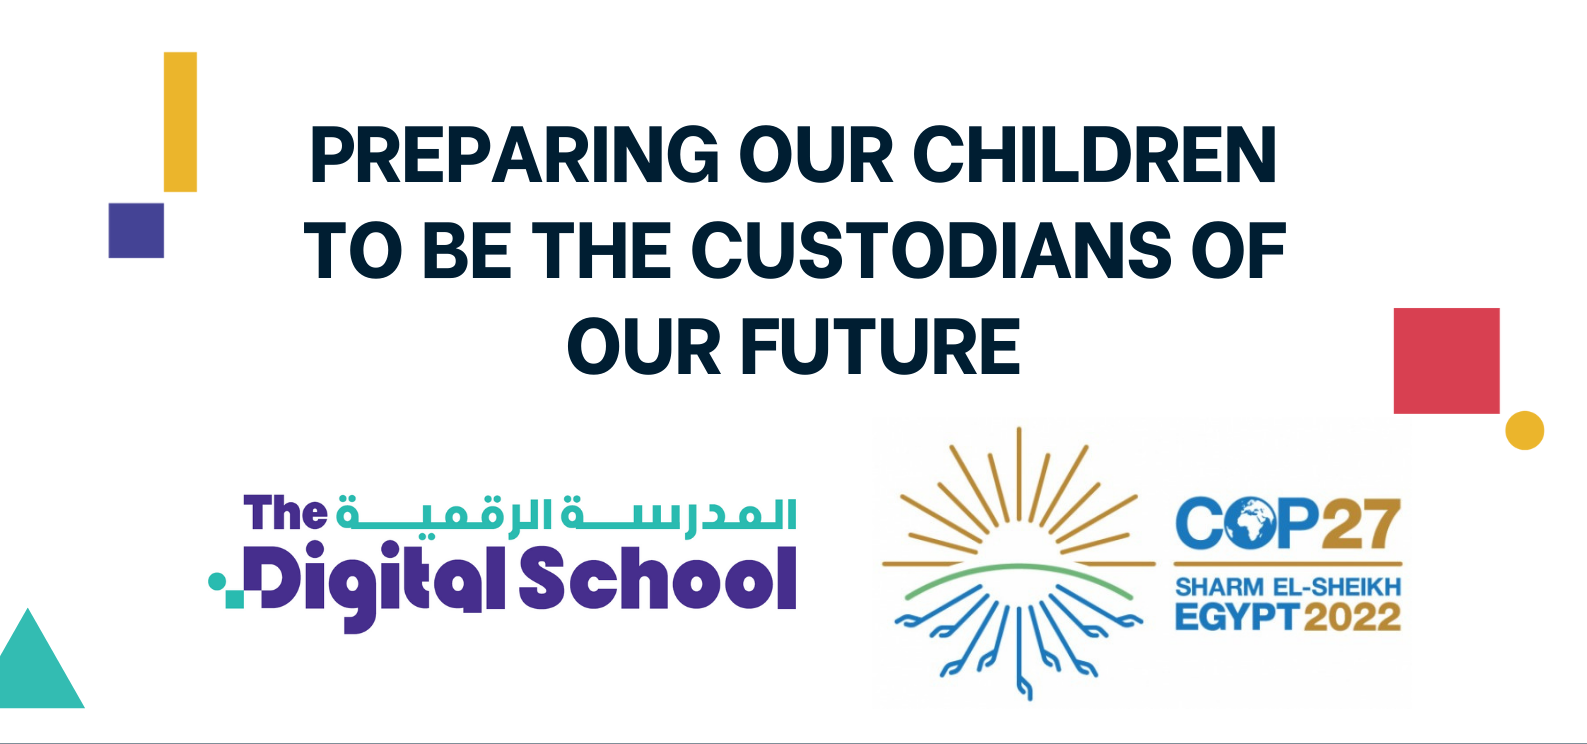 Preparing our children to be the custodians of our future